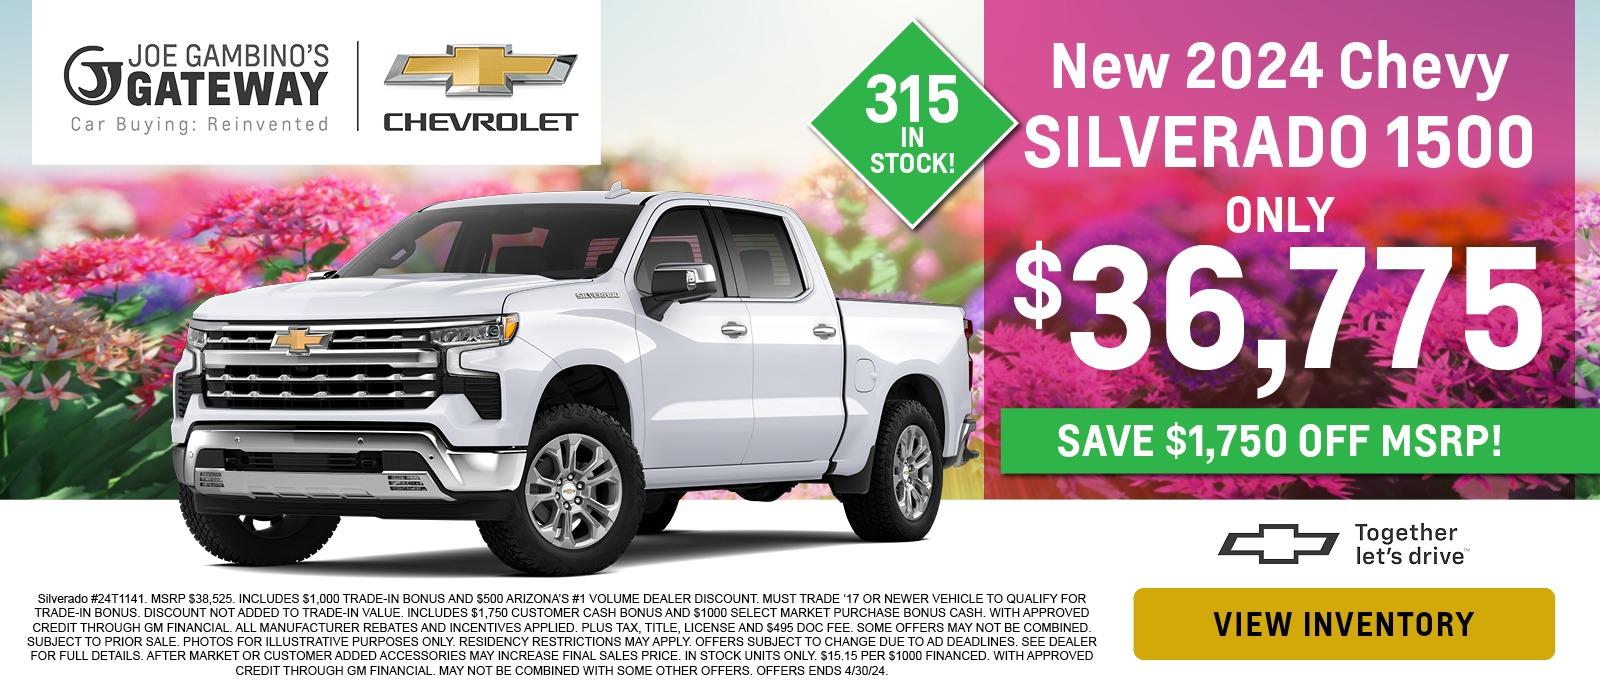 New 2024 Chevy Silverado 1500
Only $36,775
Save $1,750 off MSRP!